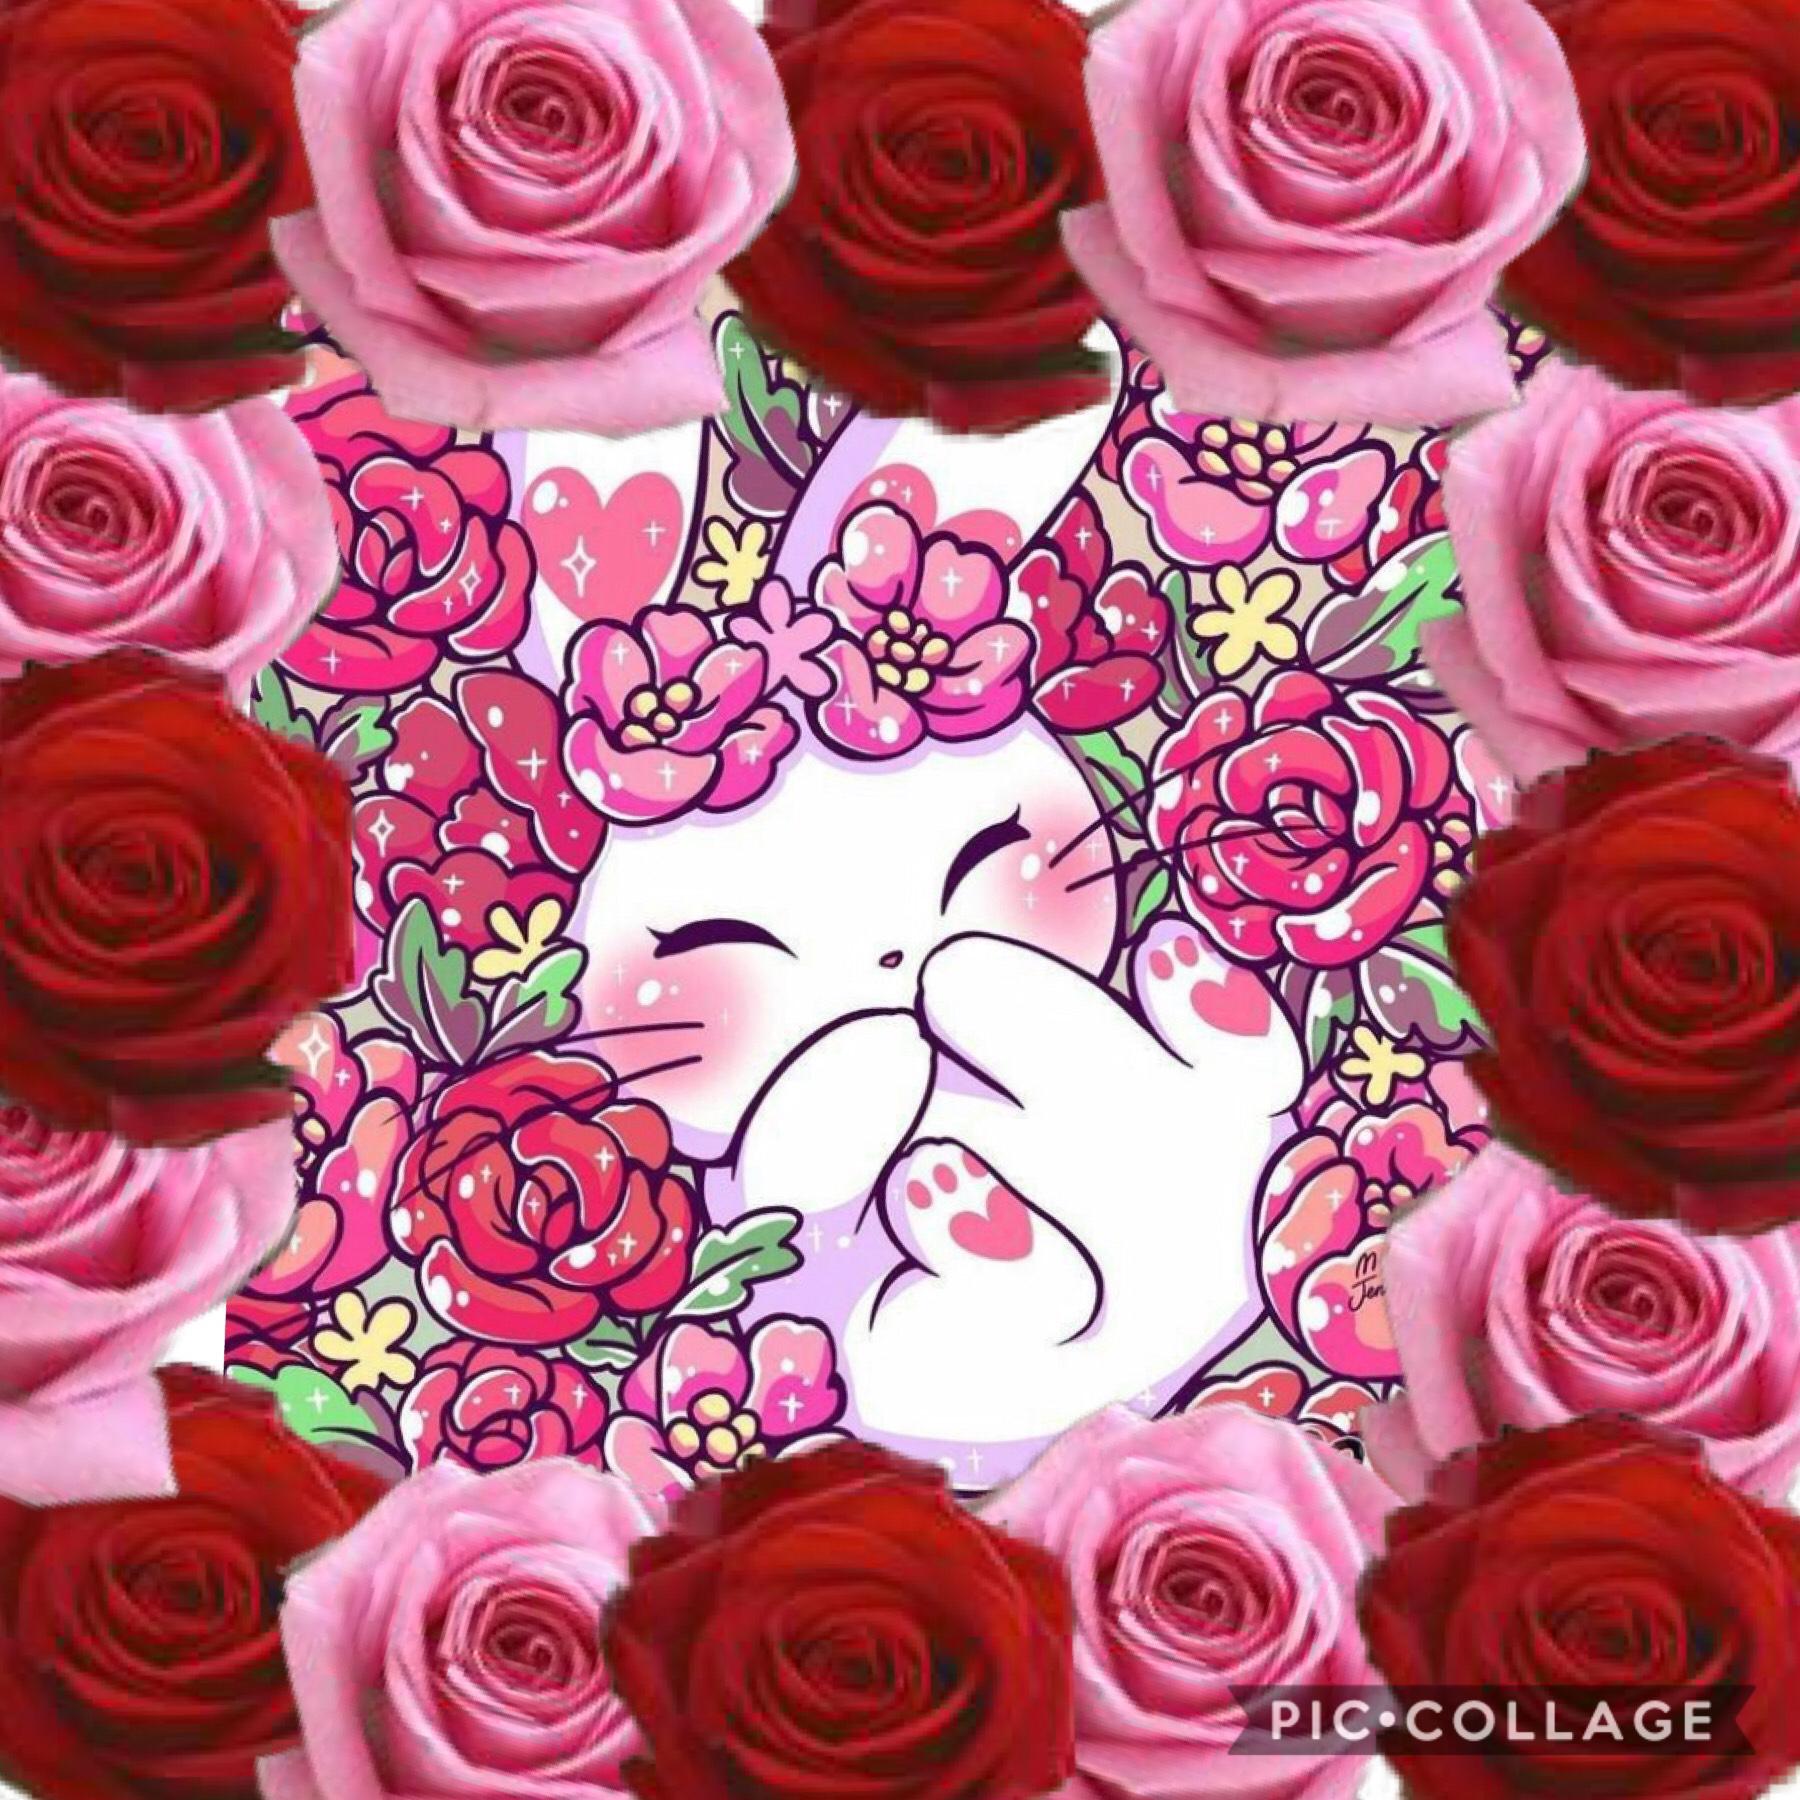 Here is this cute bunny drawing paired with a bunch of pretty little roses!!!